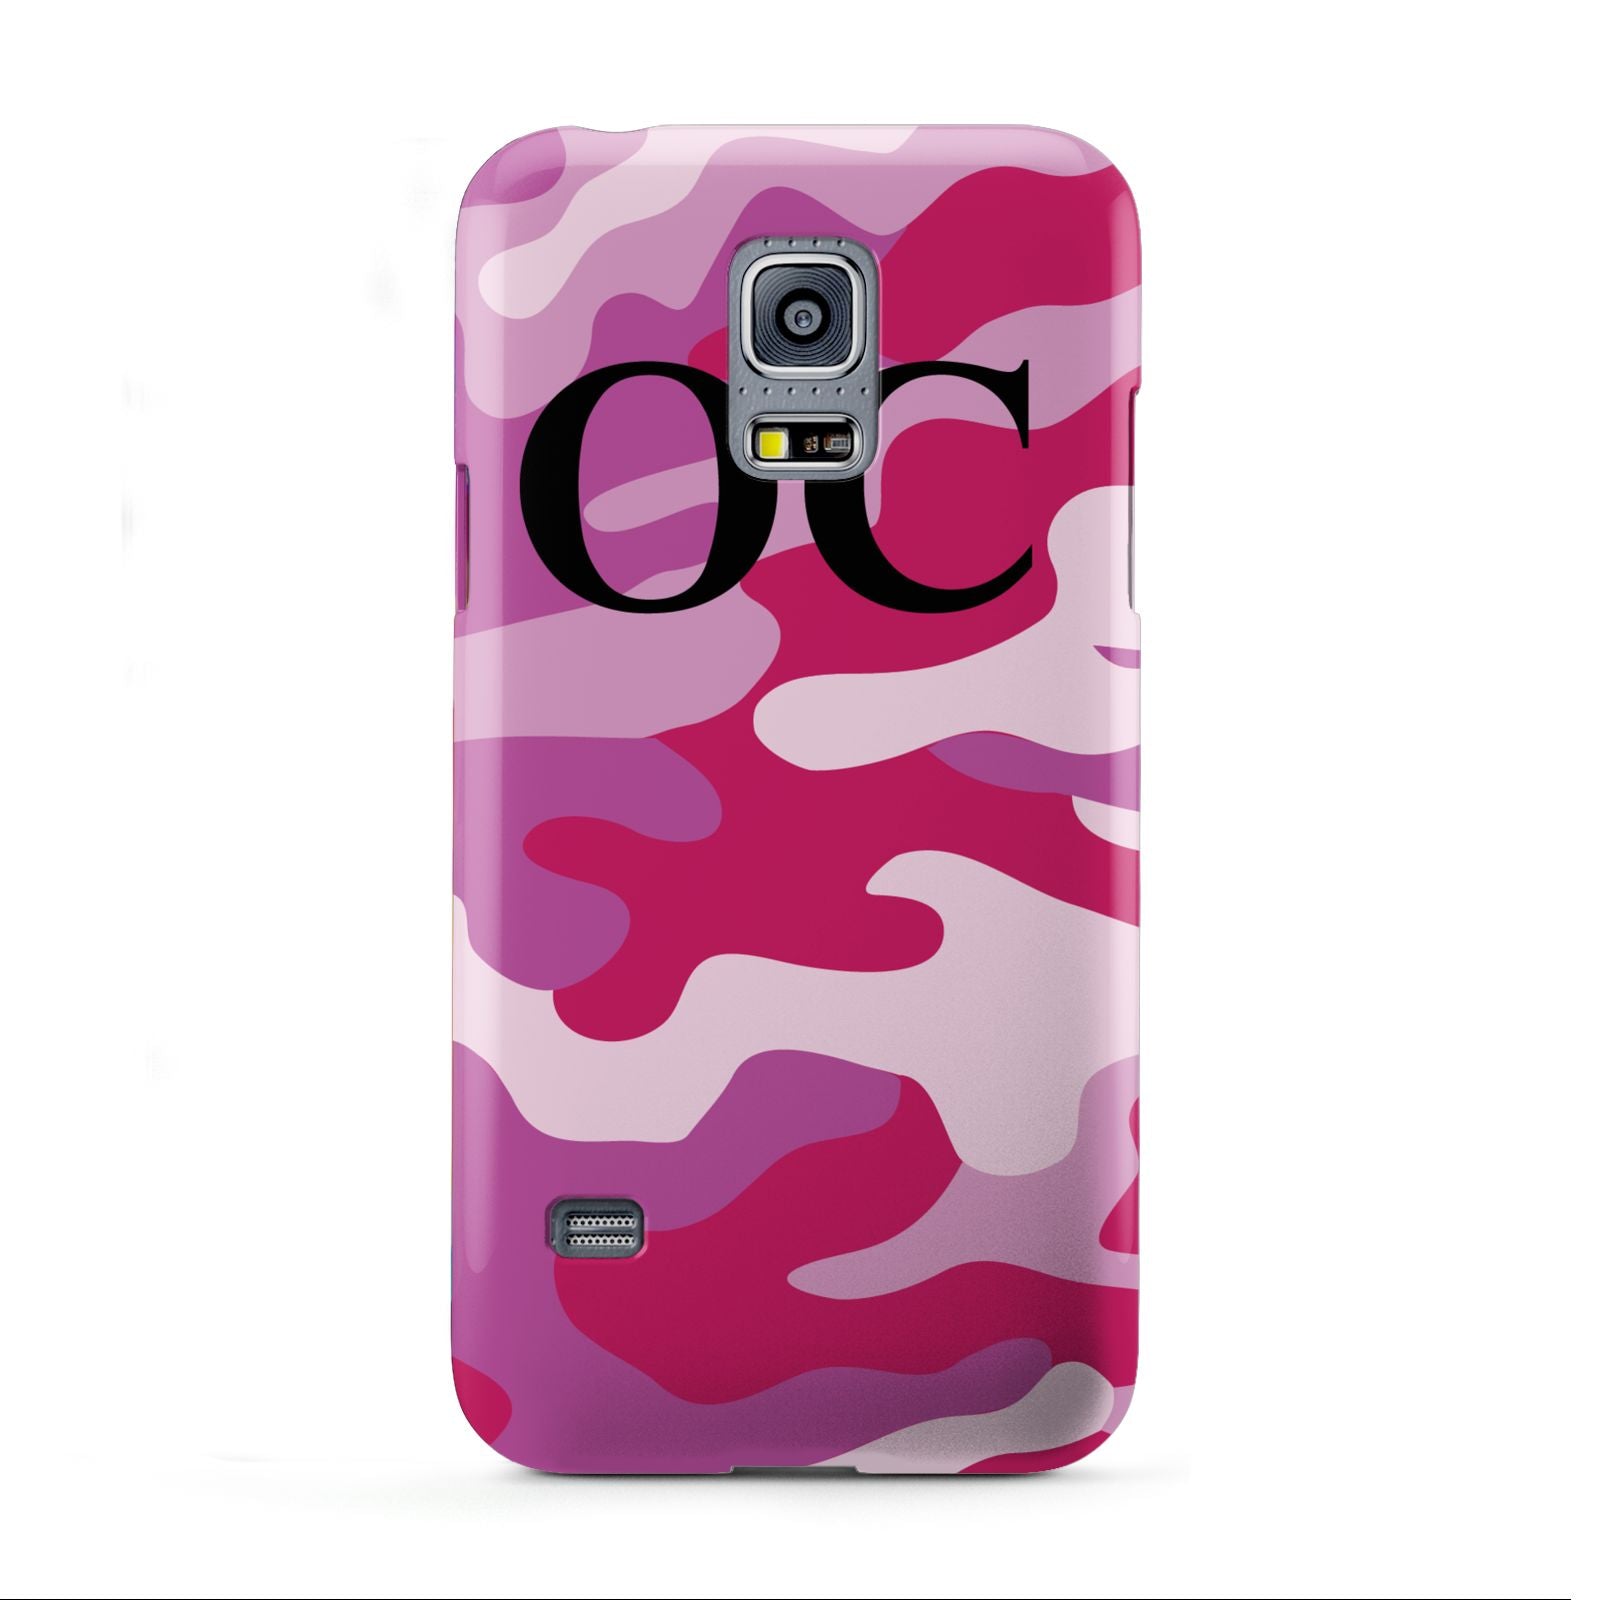 Camouflage Personalised Samsung Galaxy S5 Mini Case